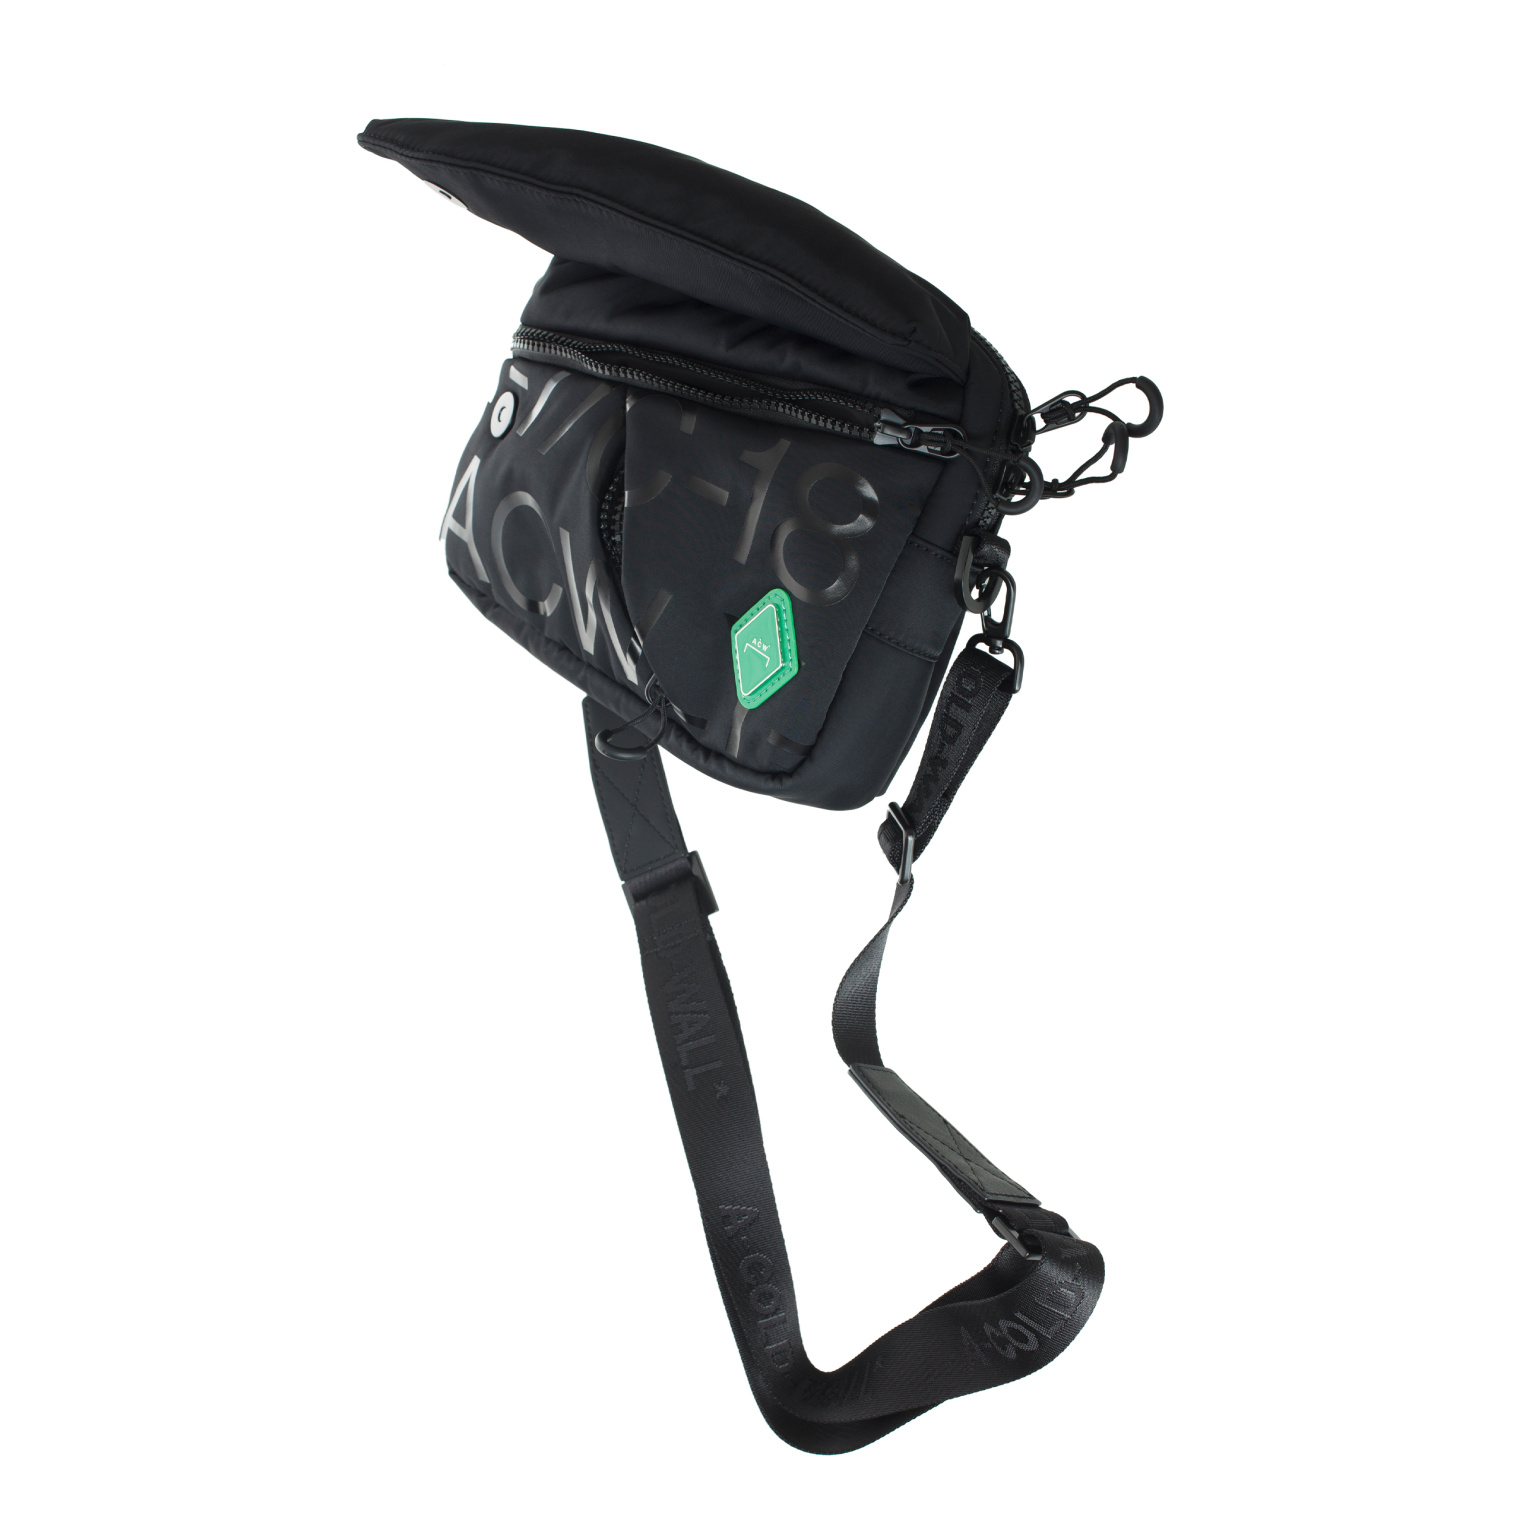 A-COLD-WALL* Black Padded Bag